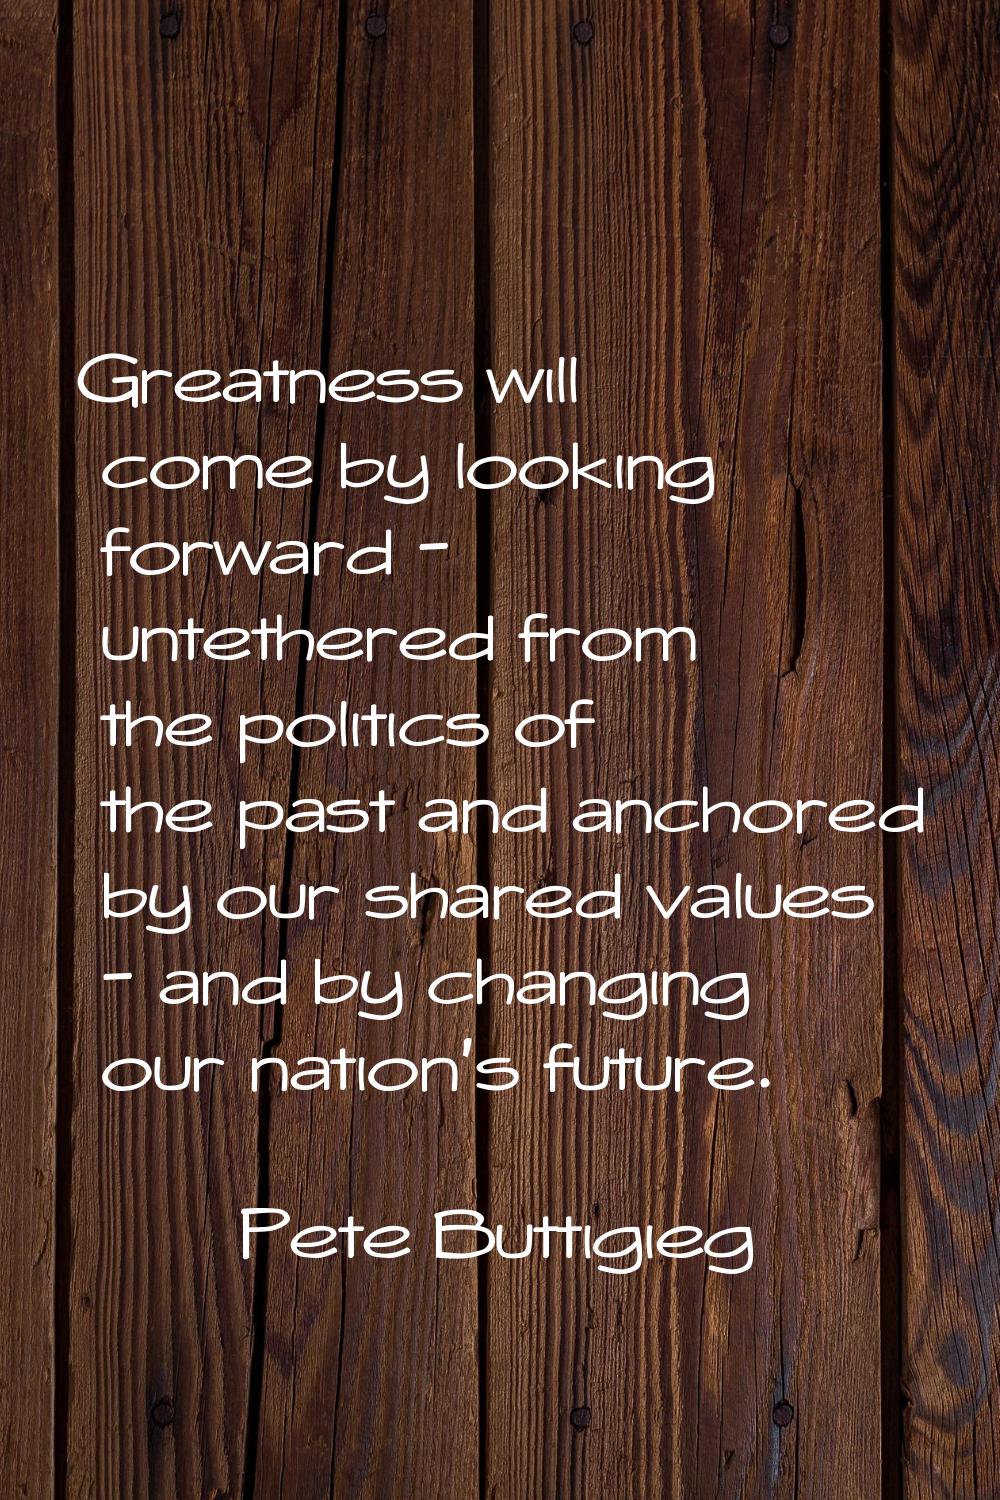 Greatness will come by looking forward - untethered from the politics of the past and anchored by o